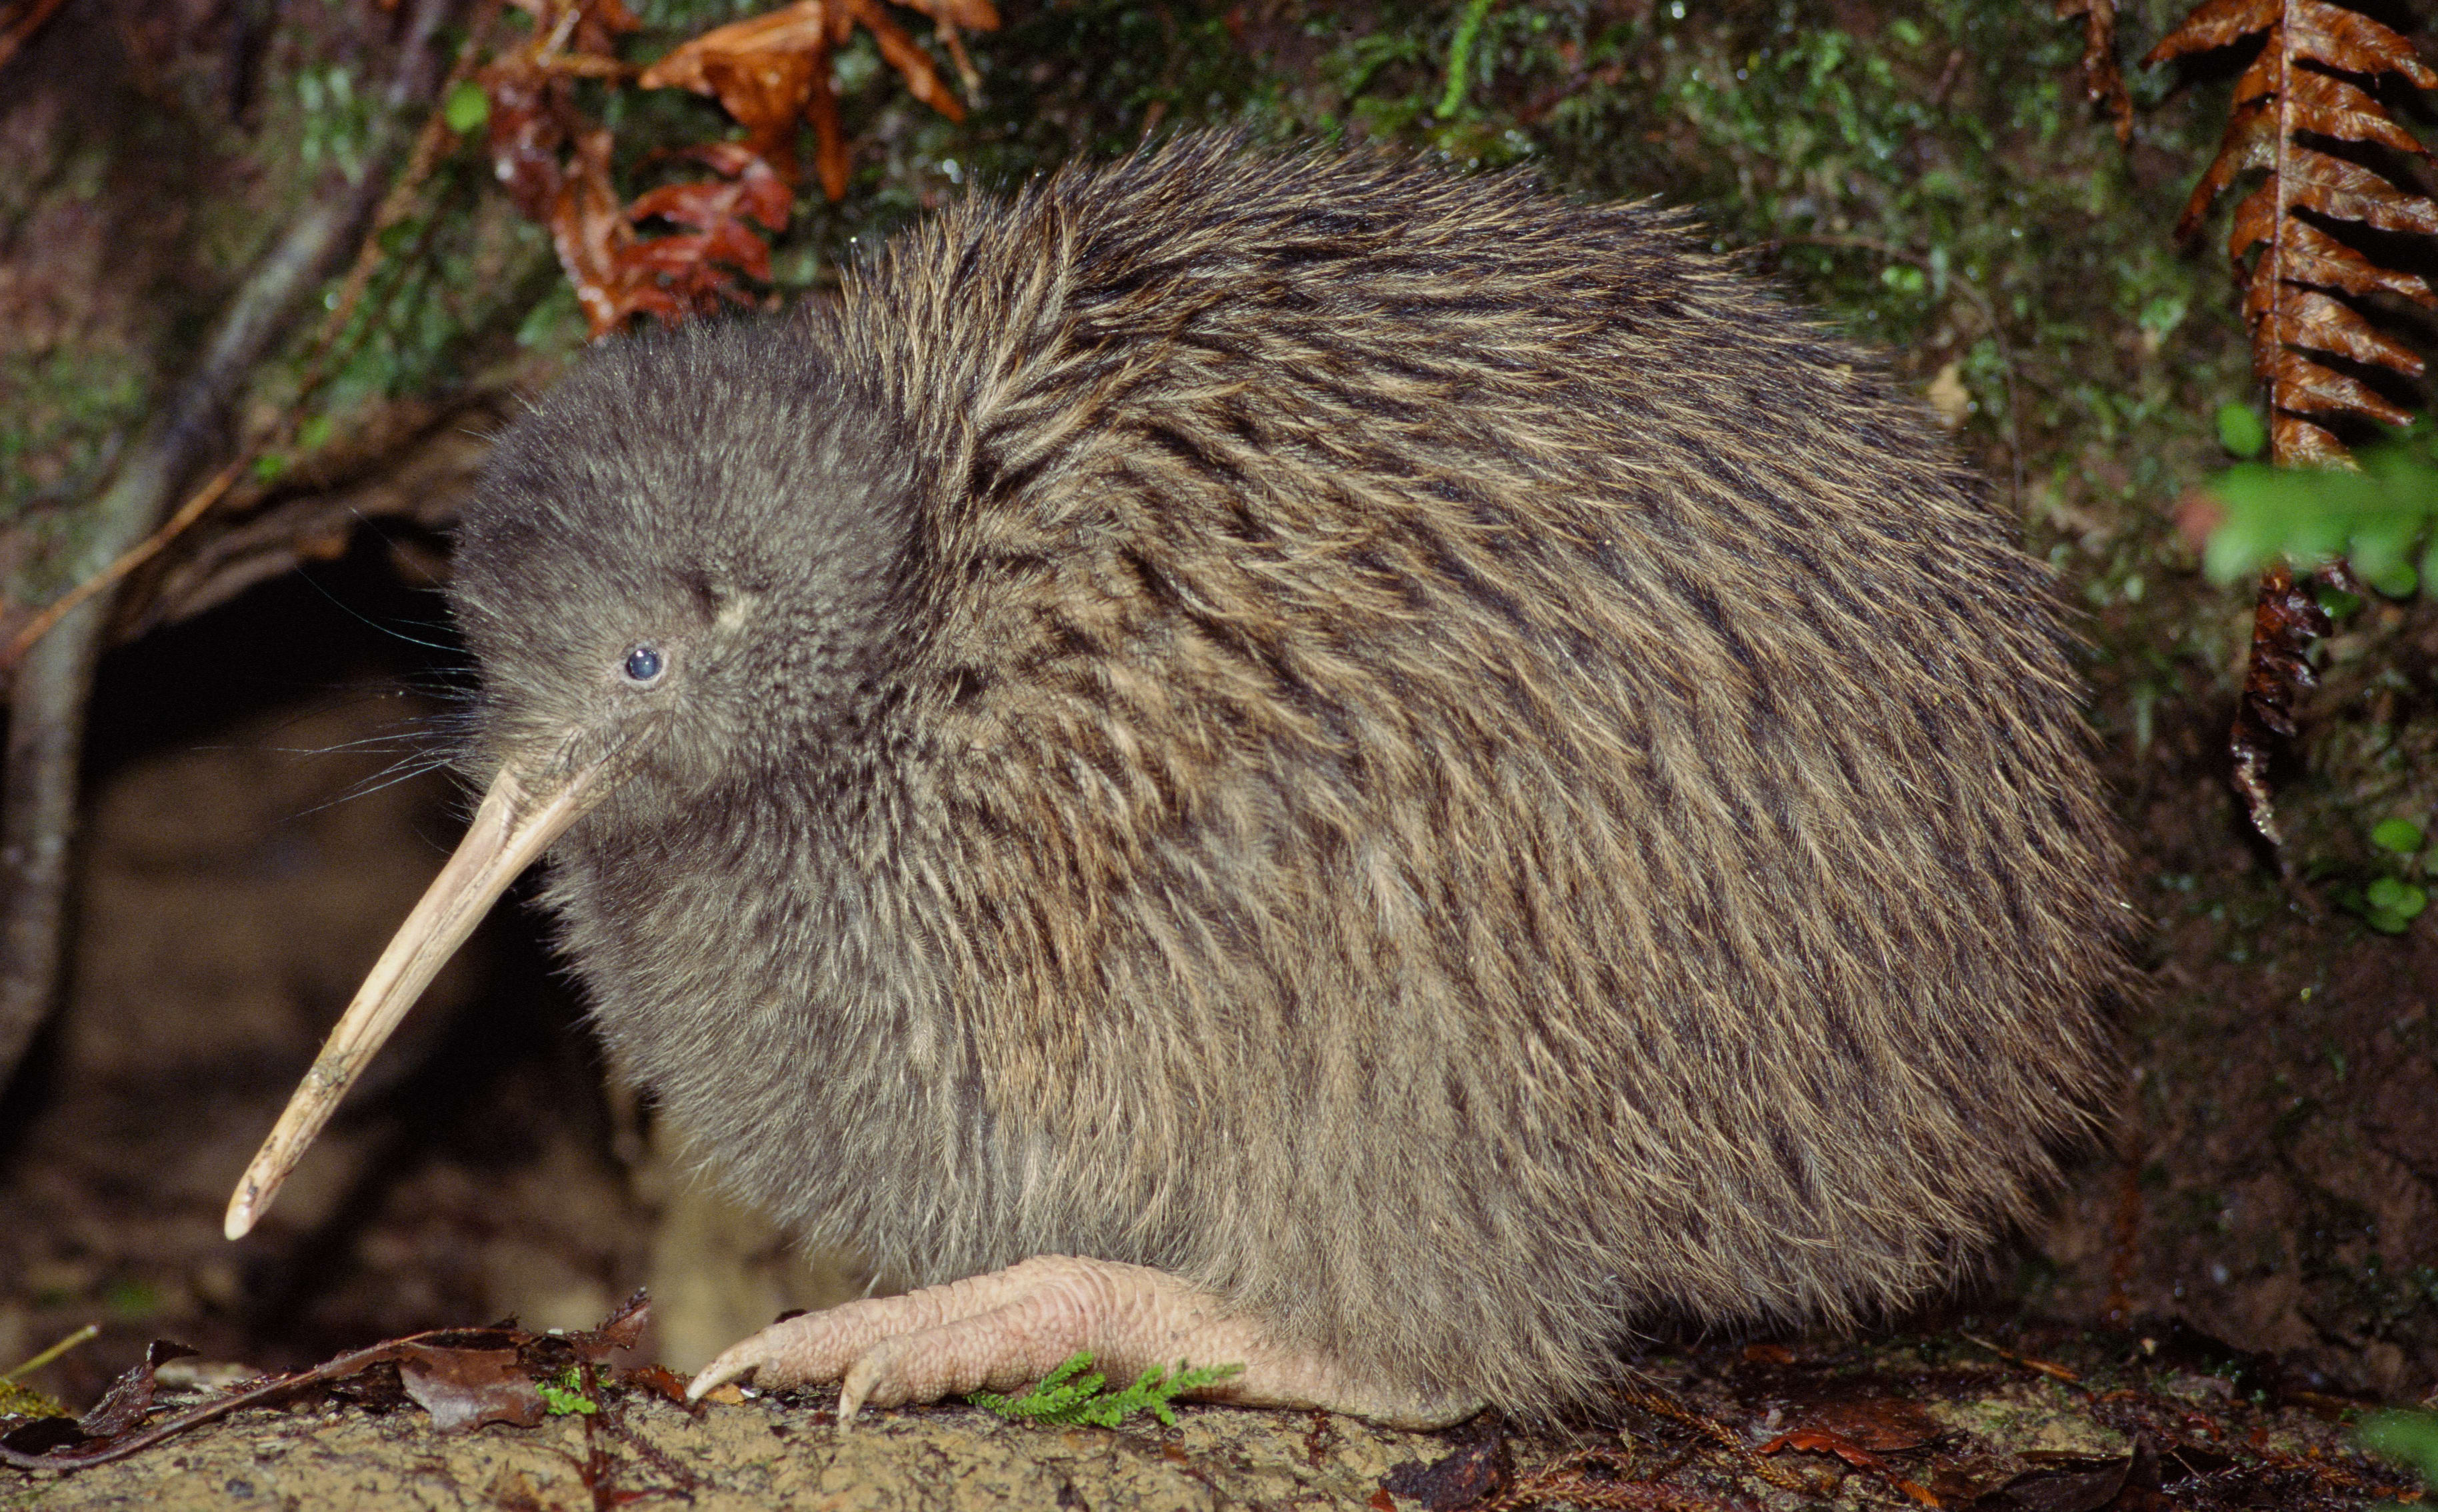 Kiwis are one of the species that could be at risk.